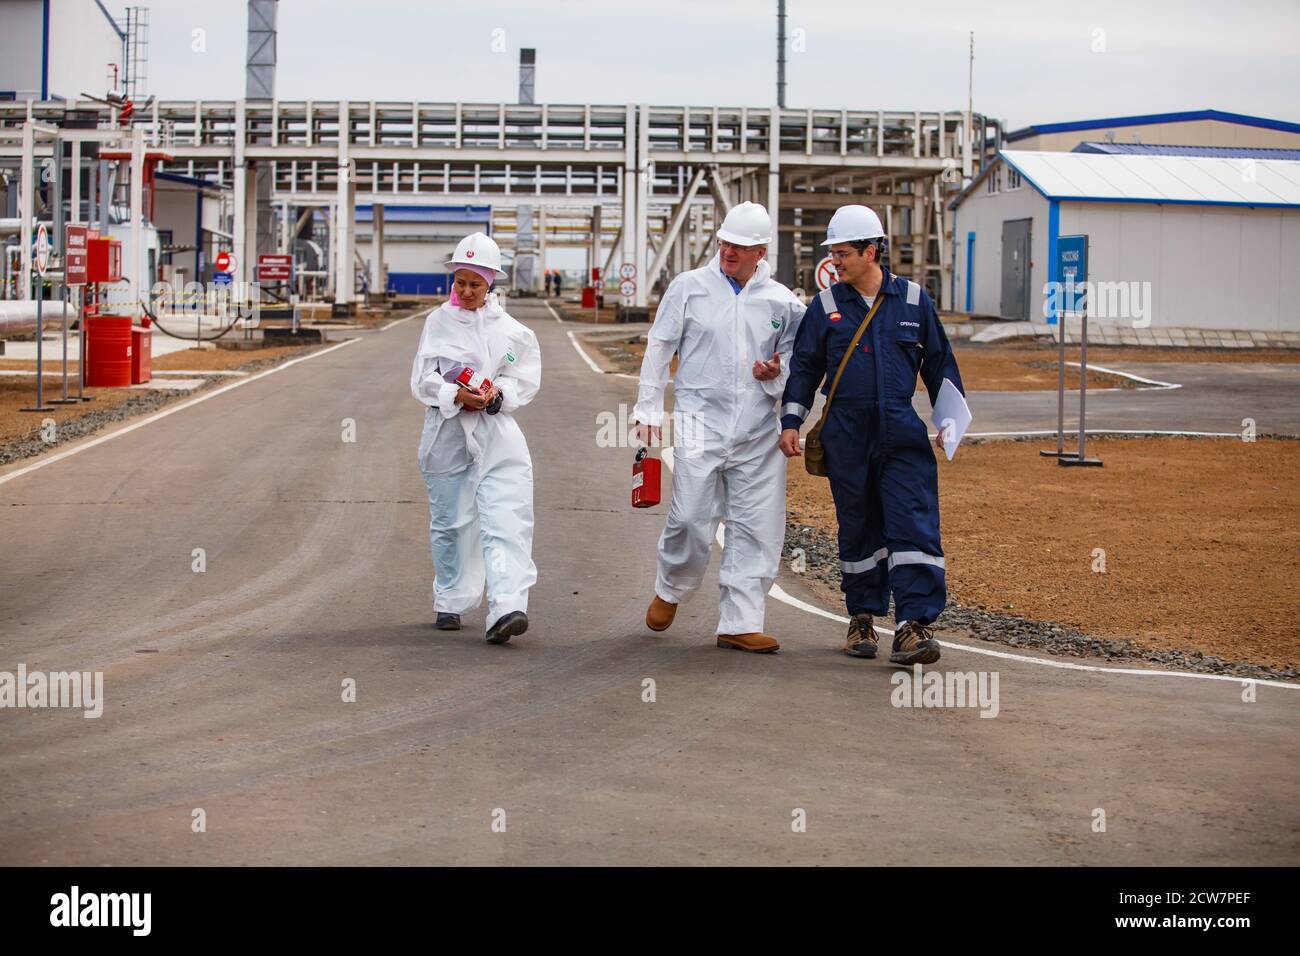 Oil refinery and gas processing plant. Three specialists oil engineers on pipelines background. Zhaik-Munai oil deposit, Kazakhstan. Stock Photo